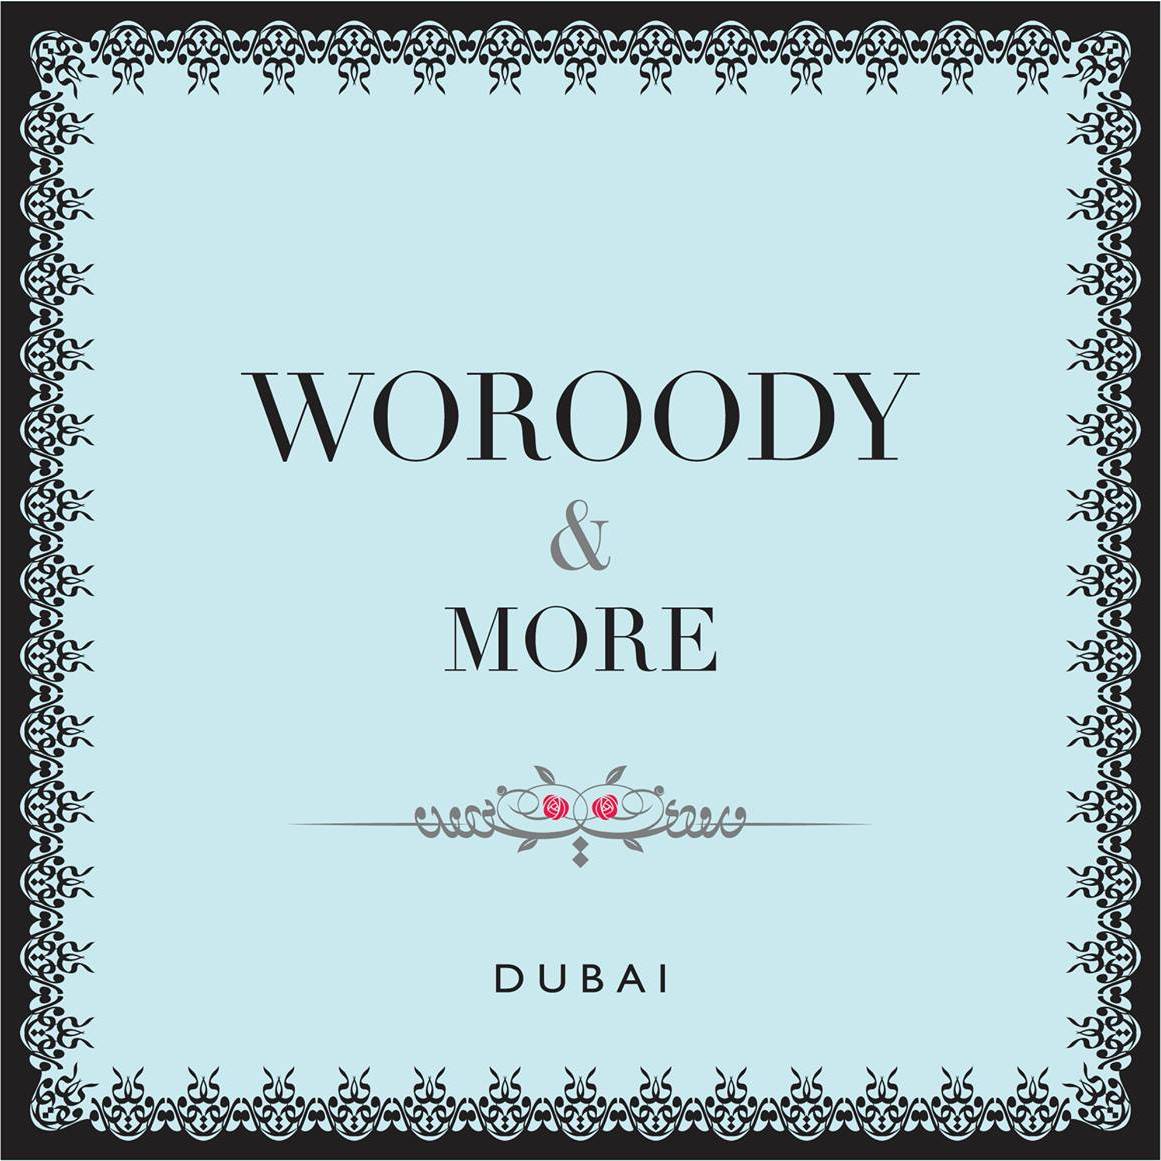 Woroody & More